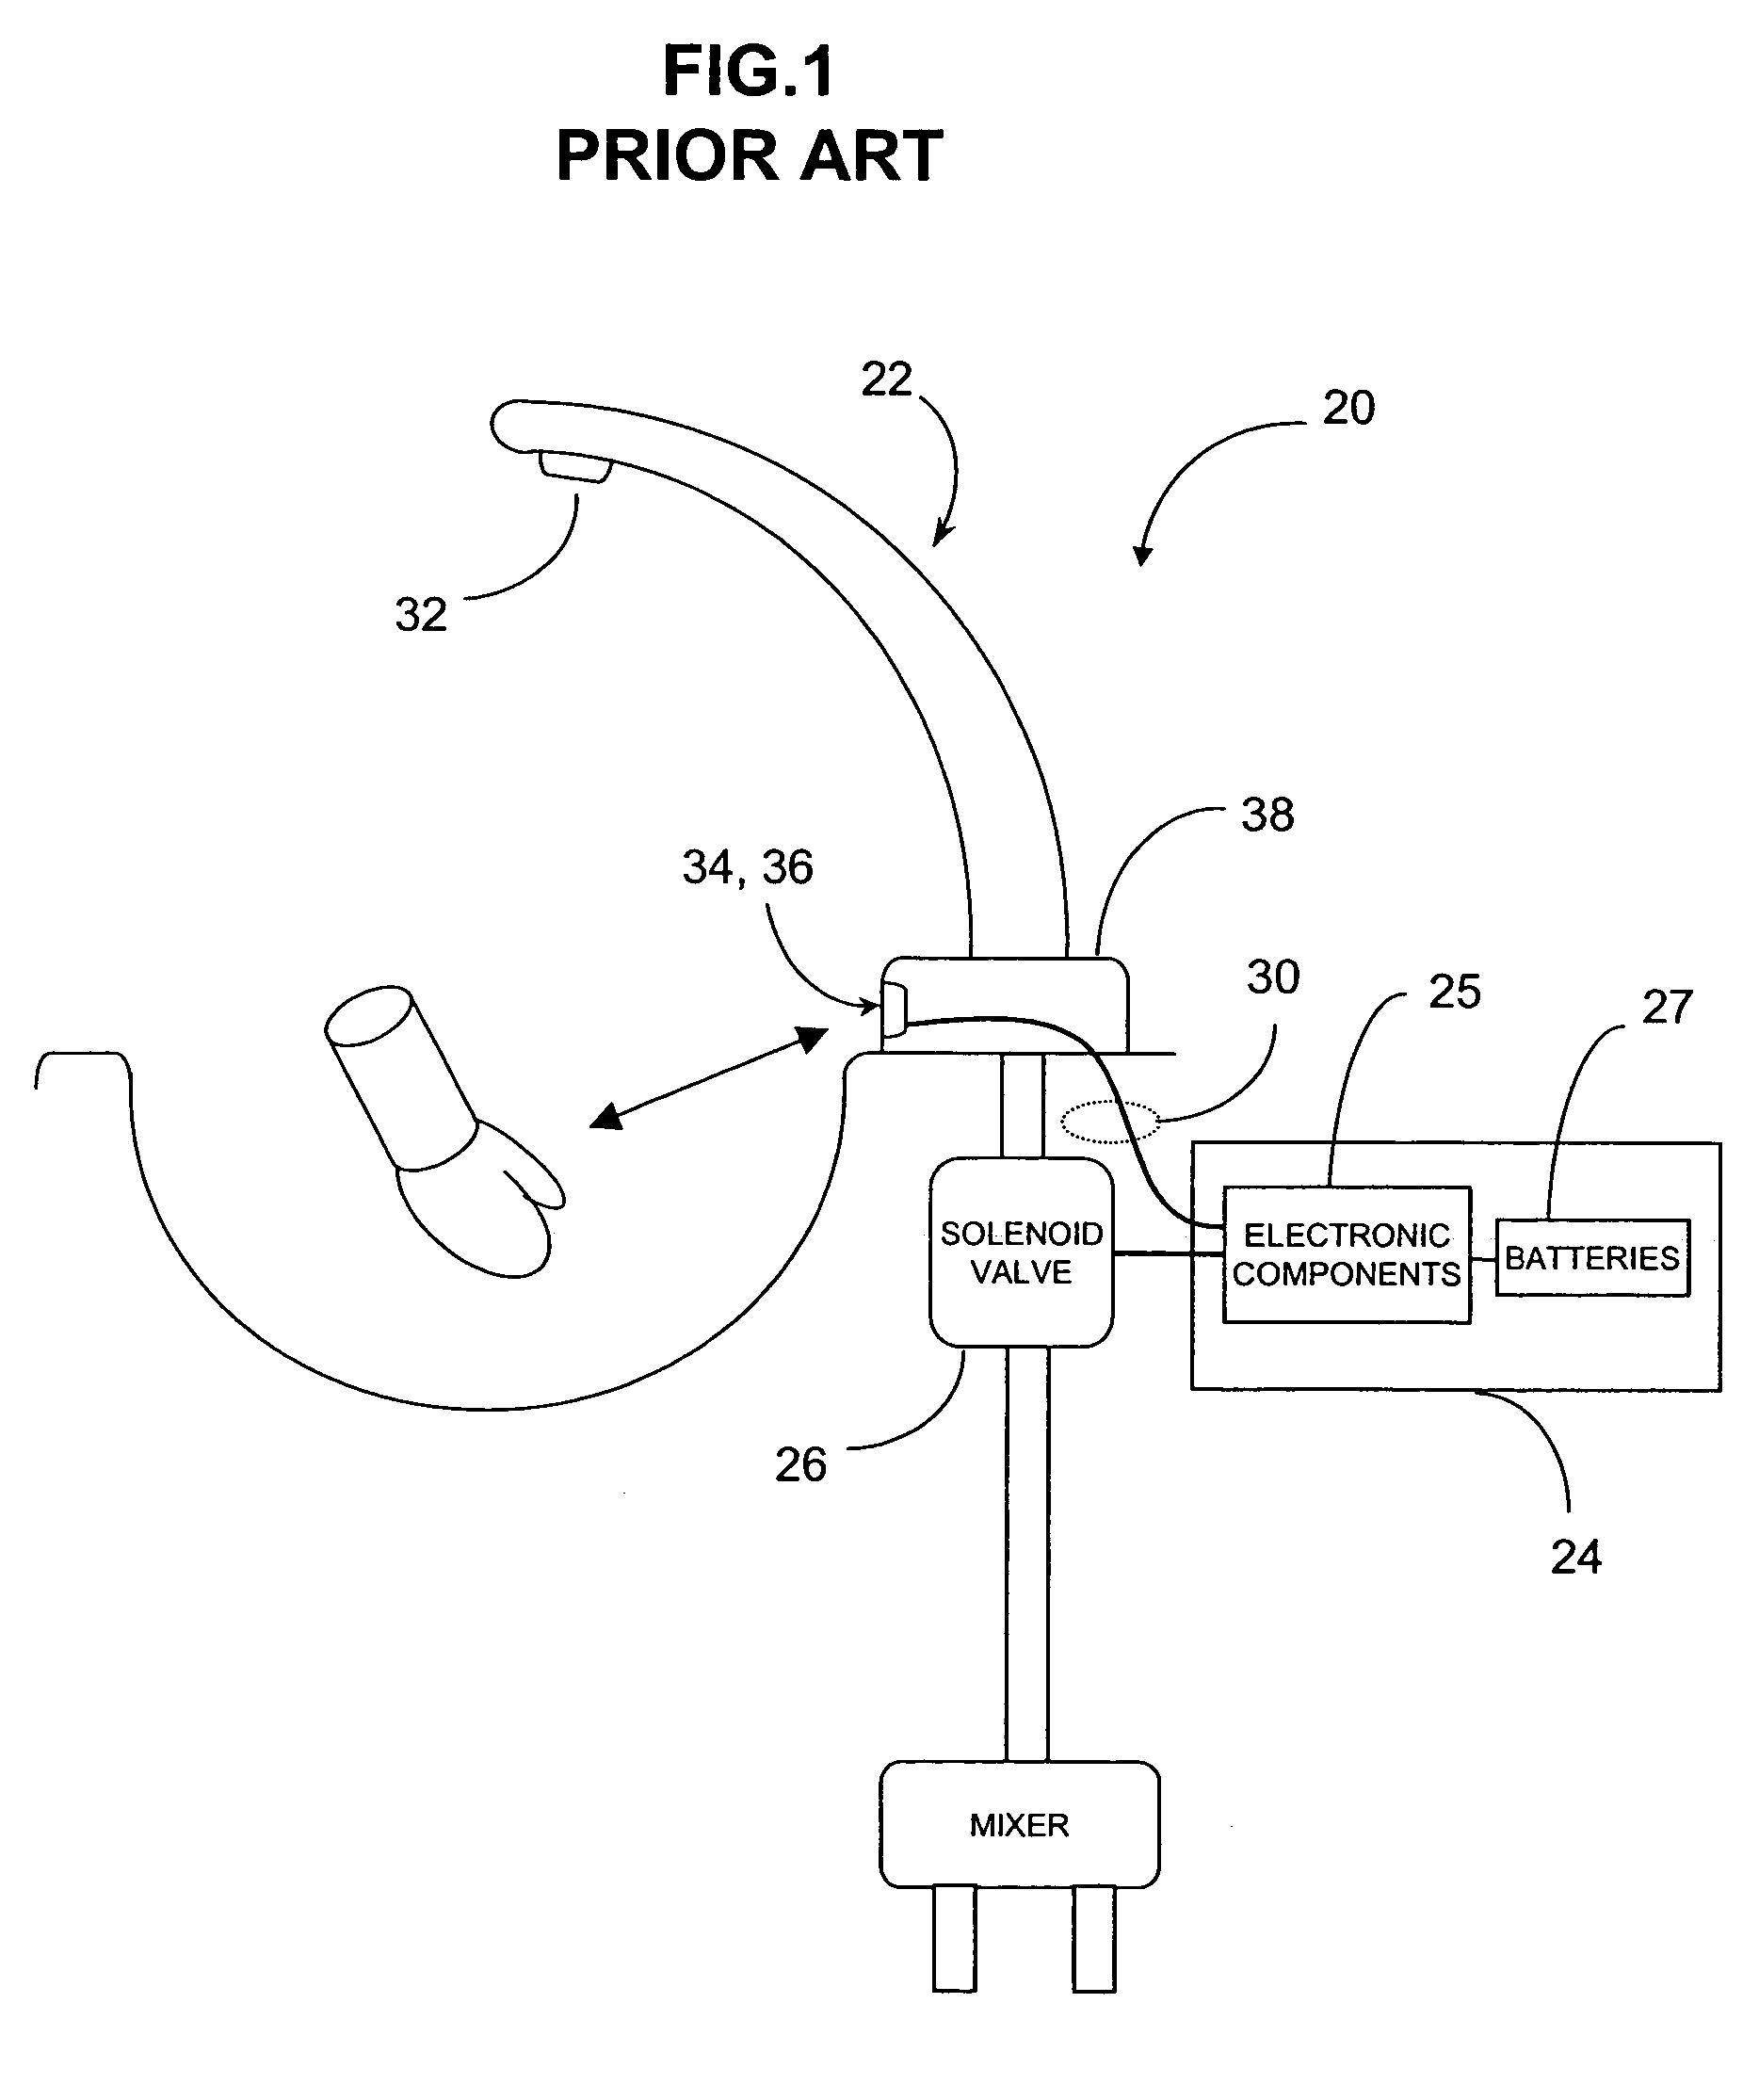 Apparatus and method for wireless data reception